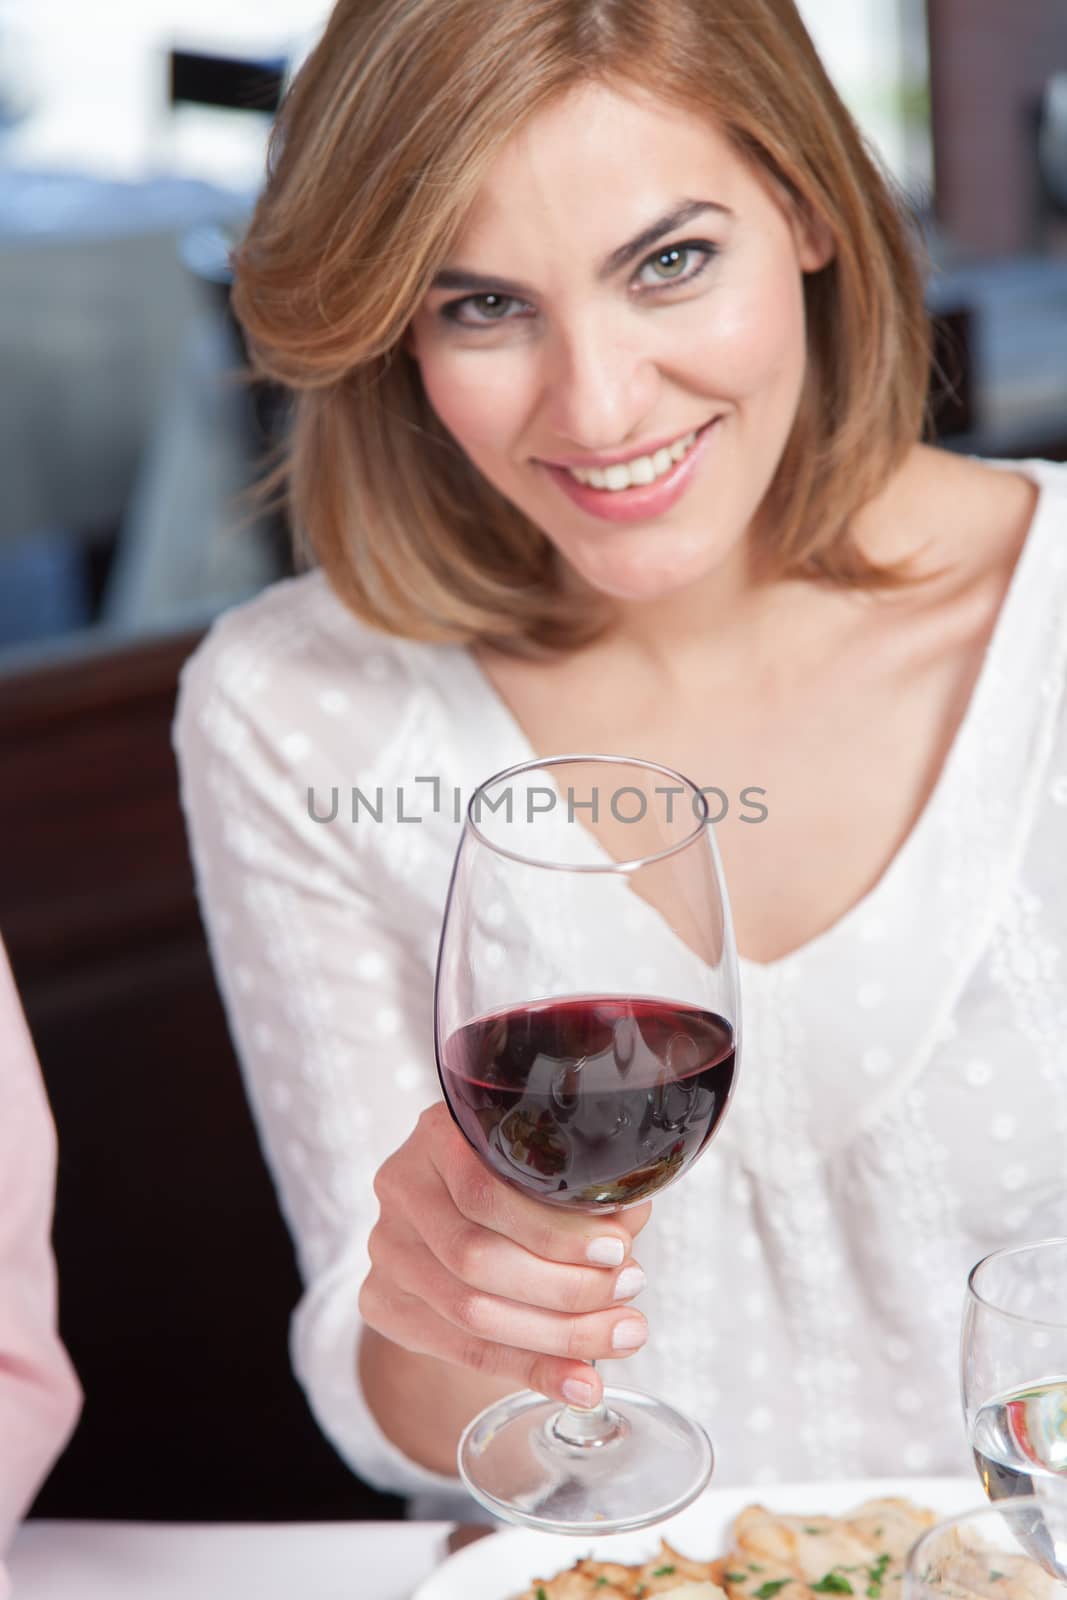 Woman is drinking a cup of wine